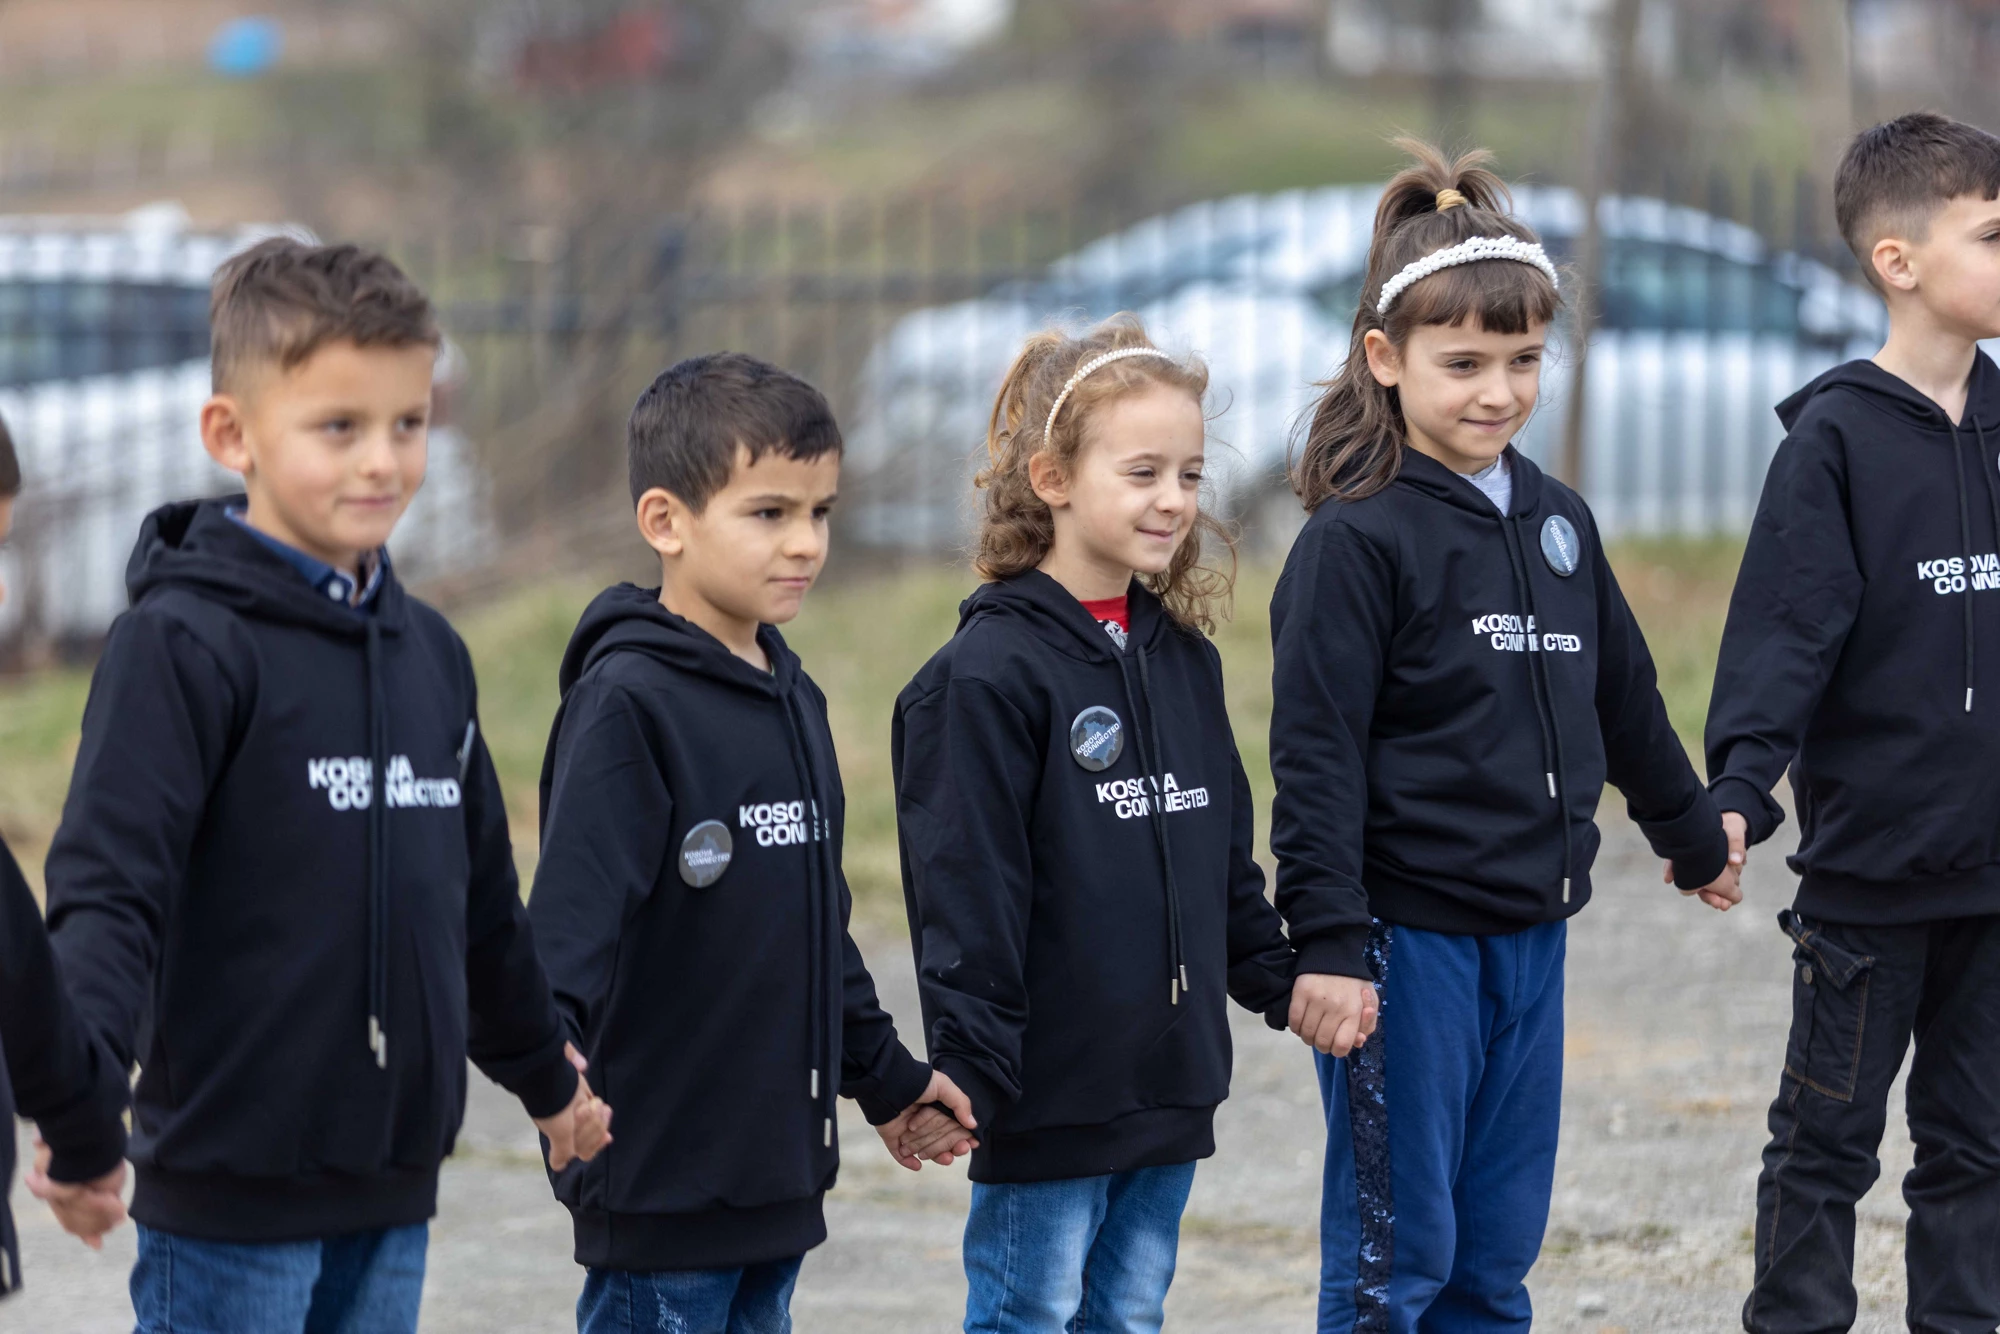 Students taking part in the Kosovo Connected event on March 21, 2023 pose outside of their school in Hertice, Kosovo.